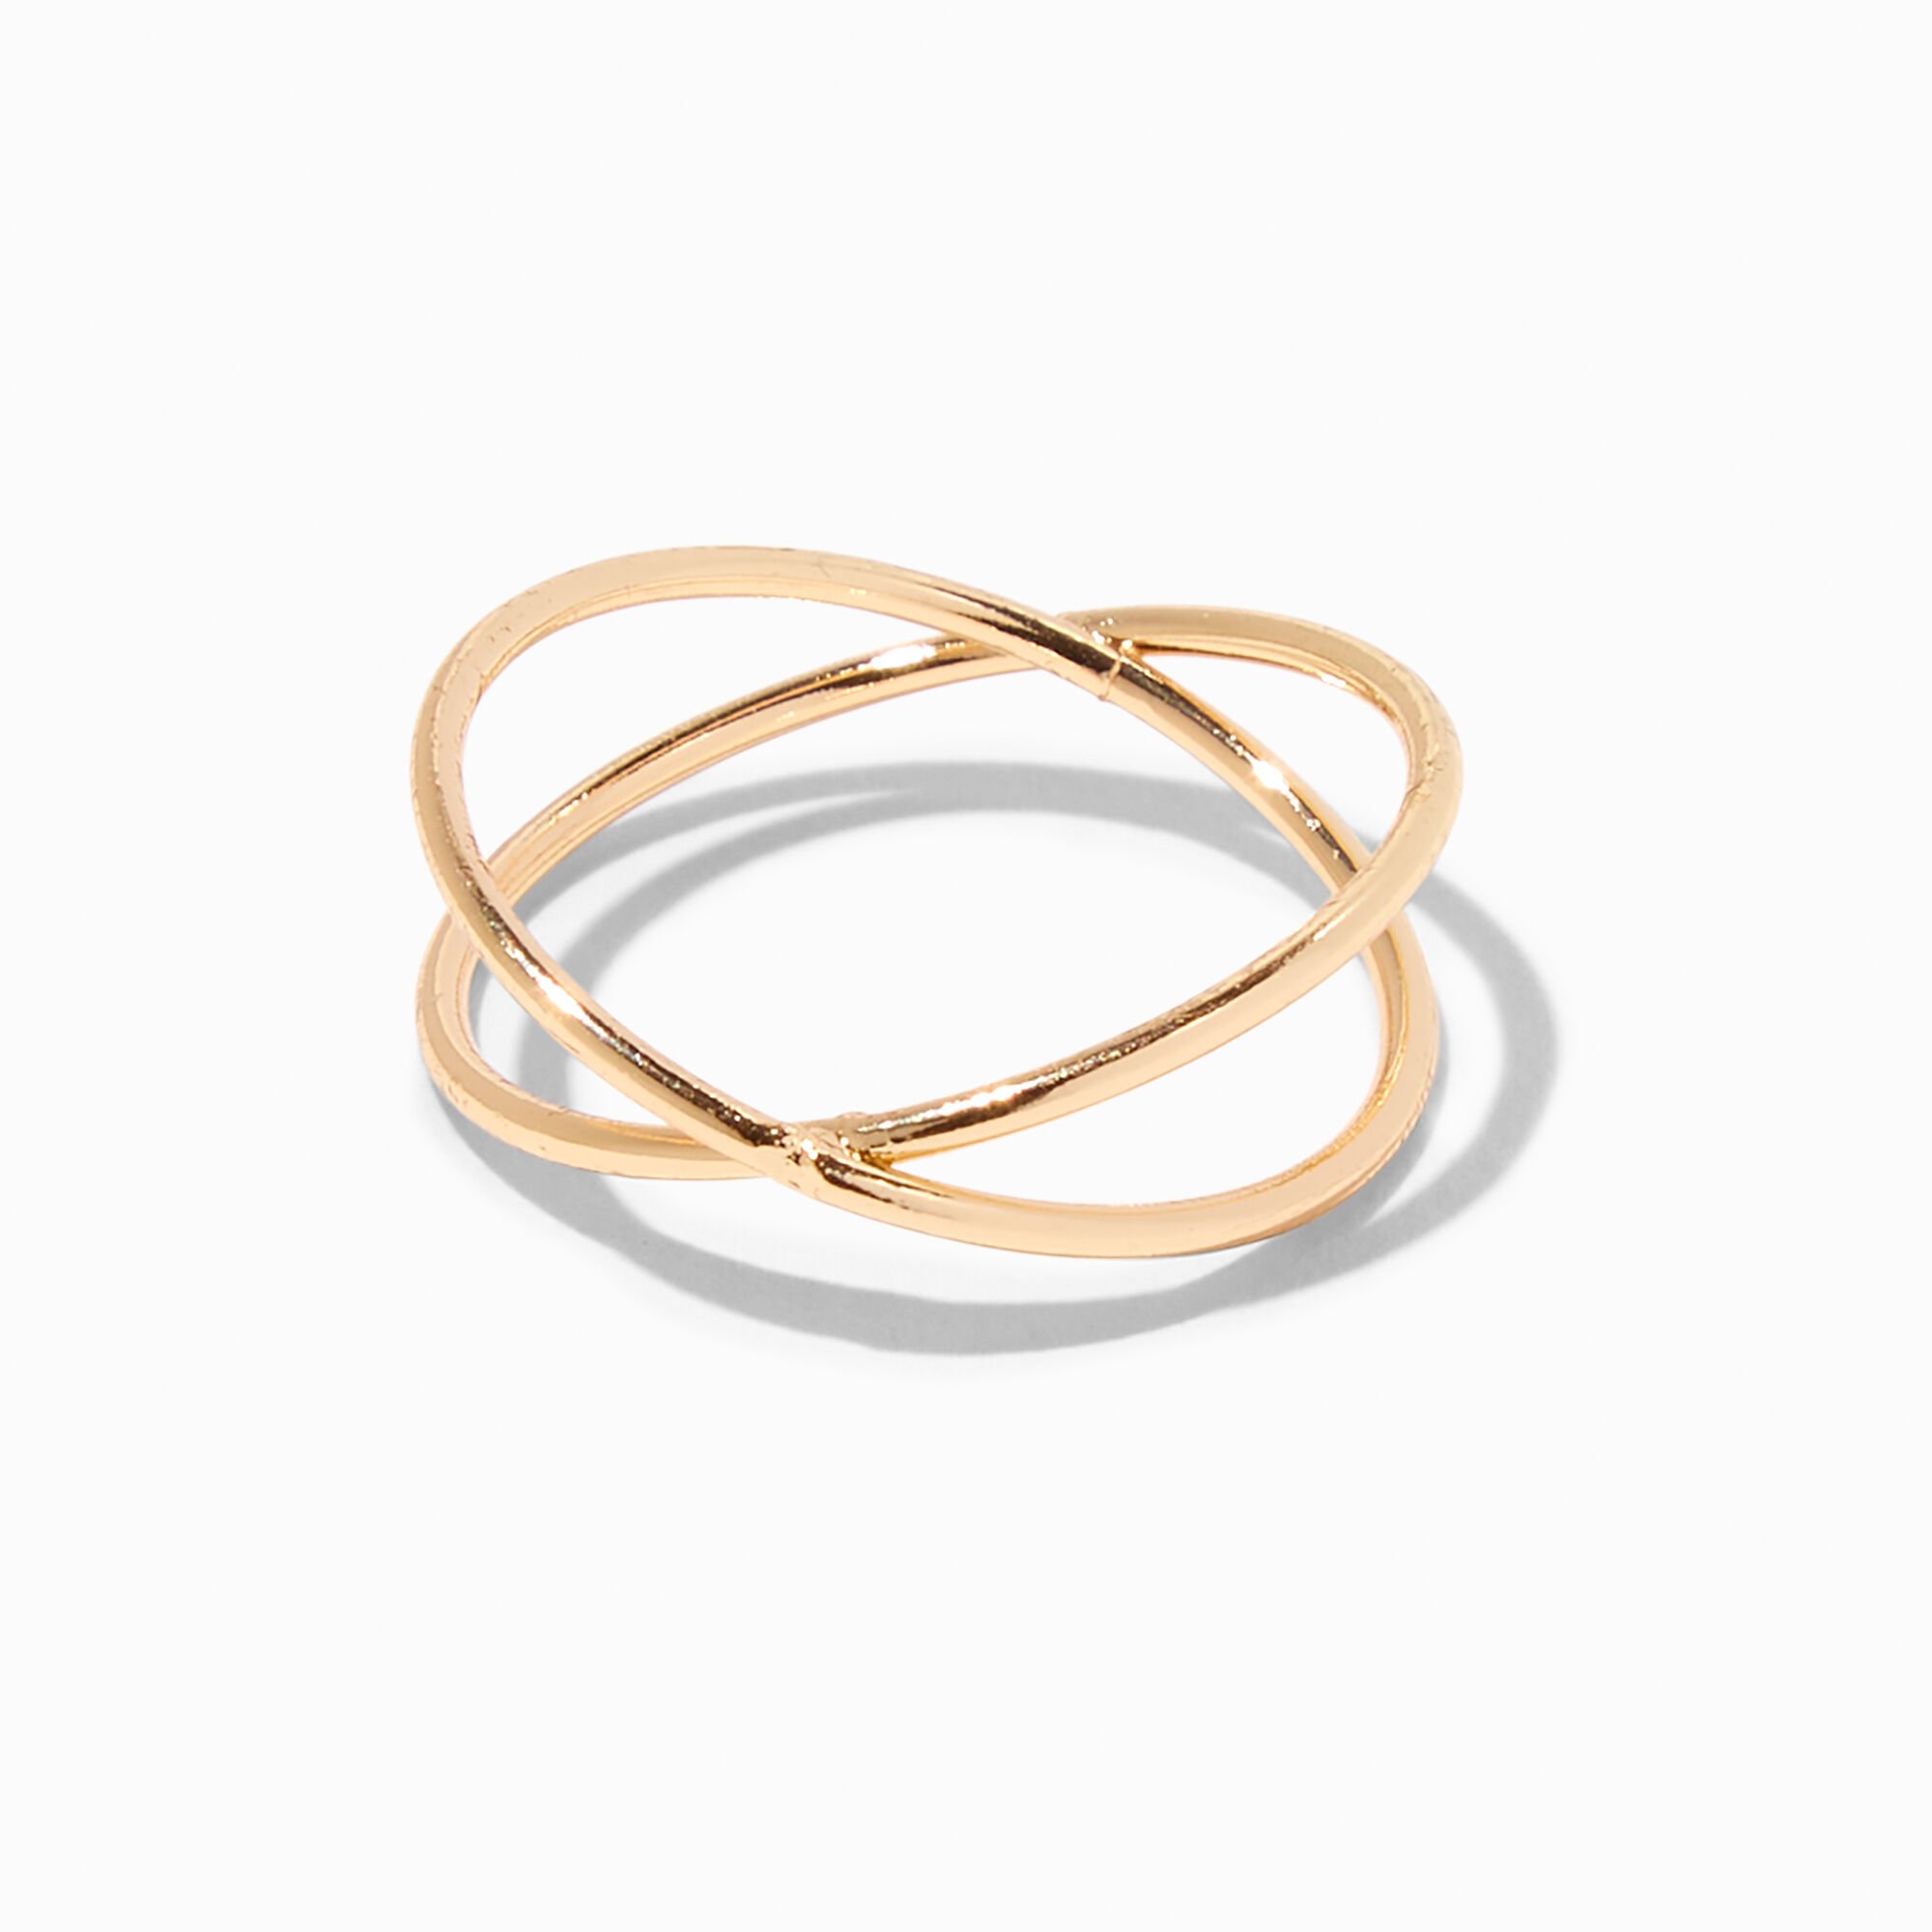 View Claires Tone Criss Cross Ring Gold information